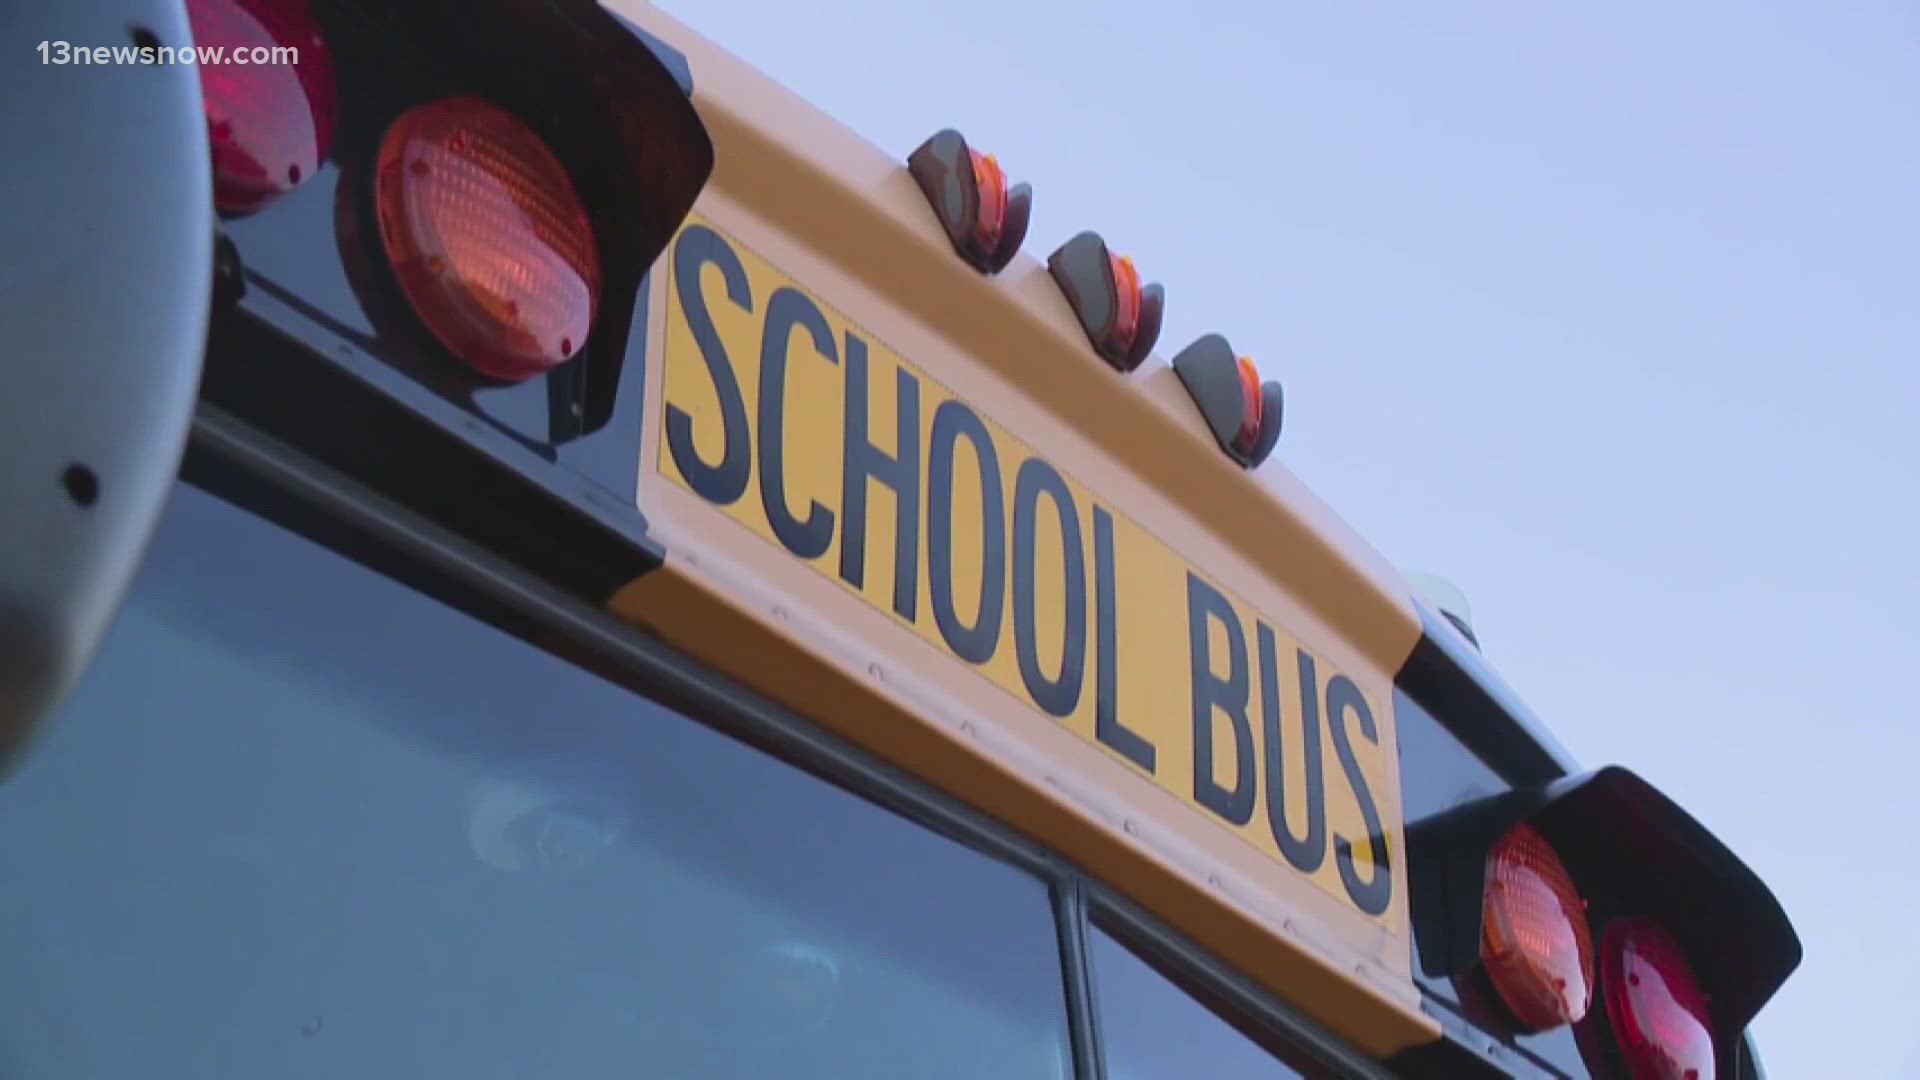 Two people face up to a year in prison after police say they pointed a gun at a school bus driver loading children onto the bus.